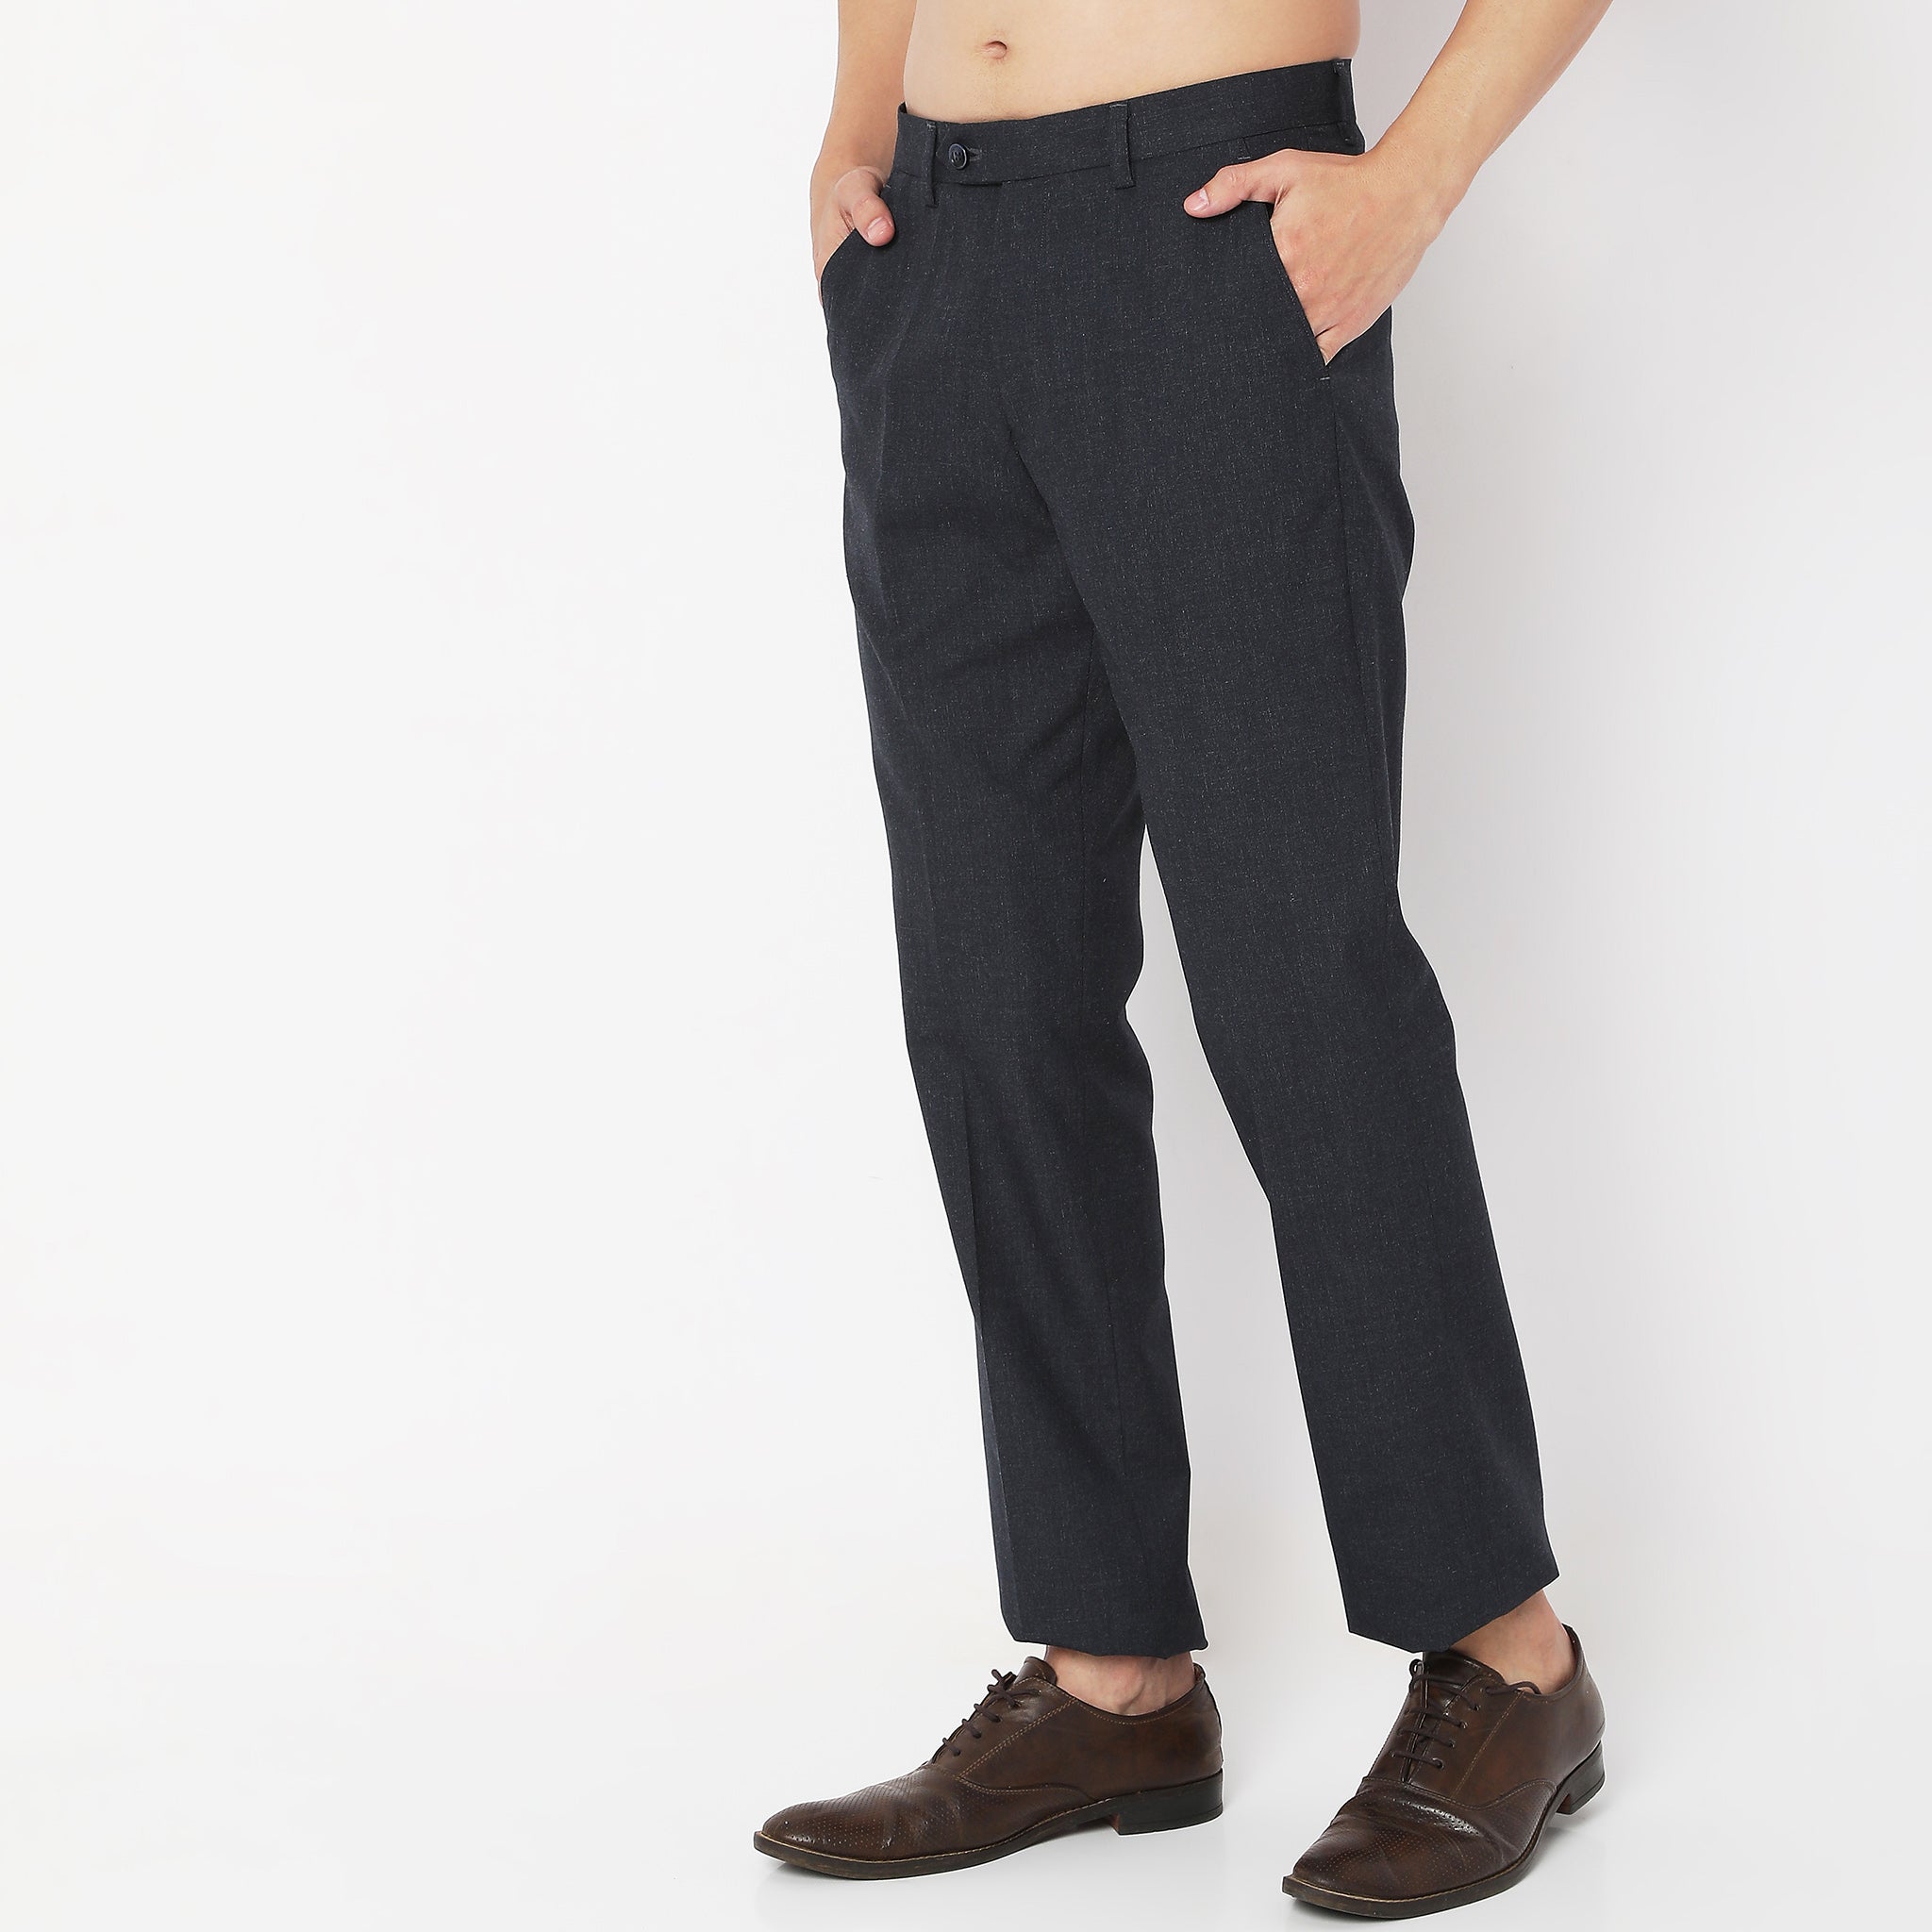 Men Wearing Slim Fit Solid Mid Rise Trouser